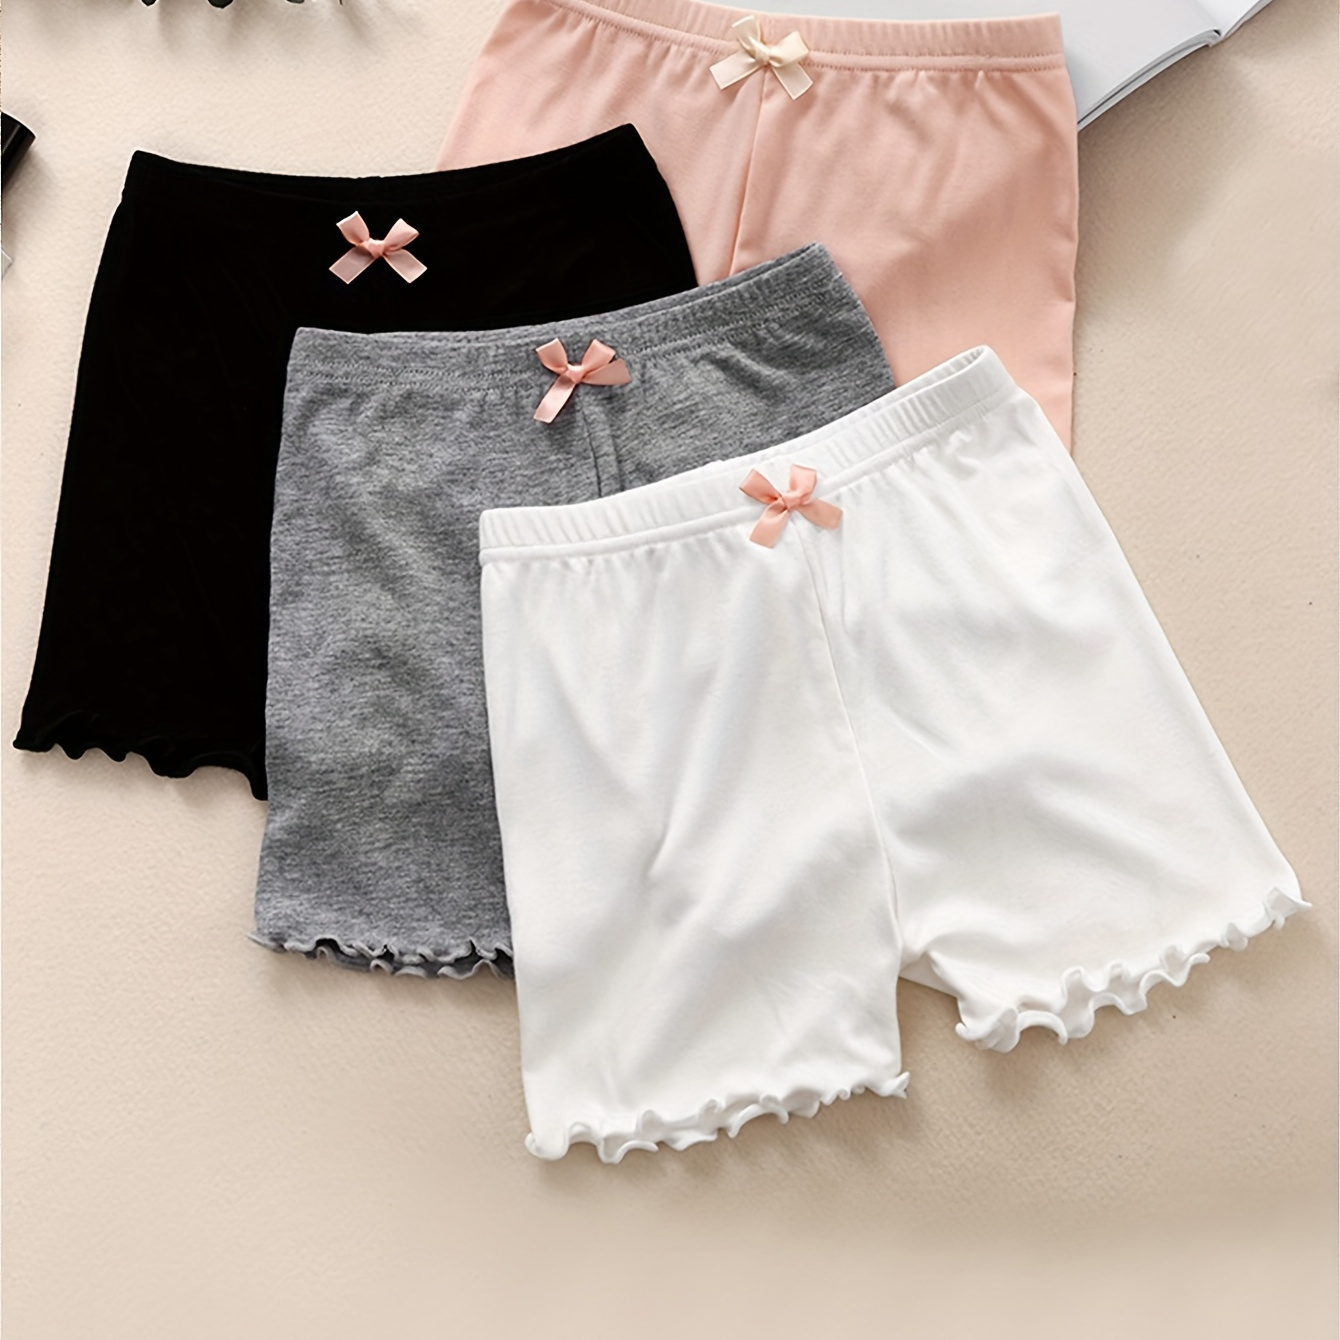 

4pcs Girls' Safety Shorts Modal Summer Thin Layer Bottoms, Cute Bow Decor High Stretch Loose Underpants, Cute Style Shorts Wearable Outdoors